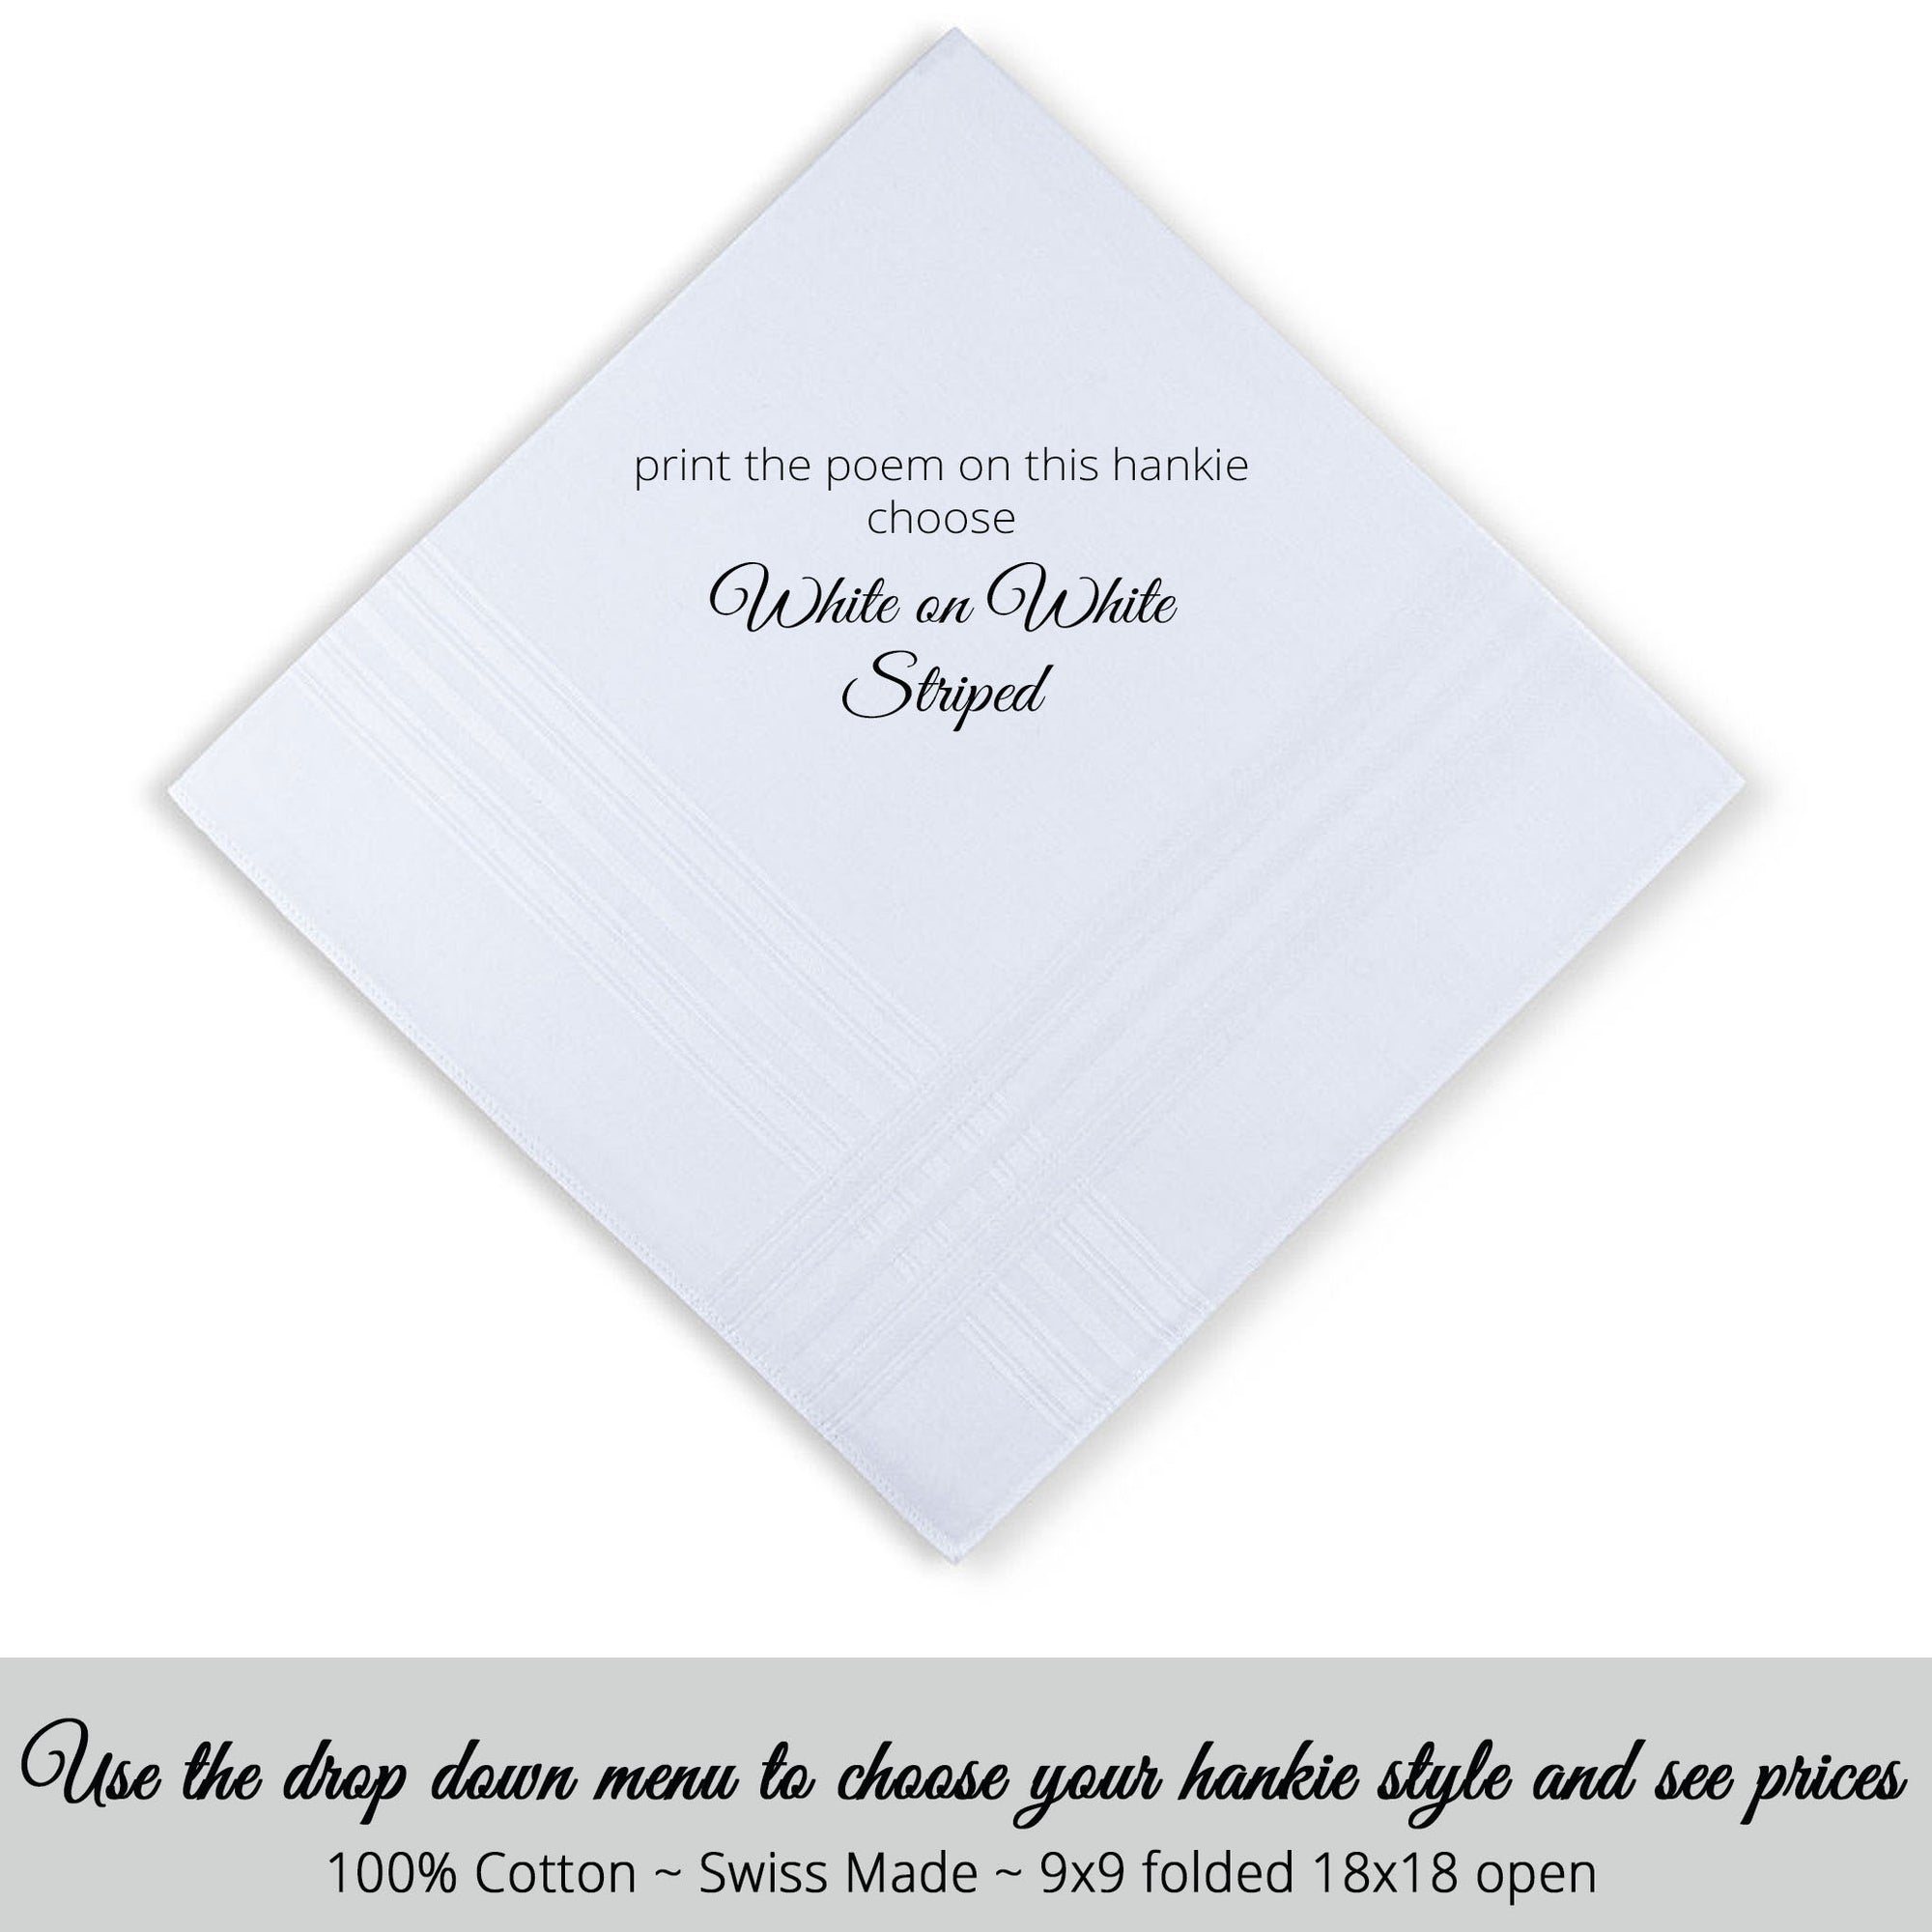 Father of the Bride Gift.  Masculine Hankie style  Swiss made white on white striped